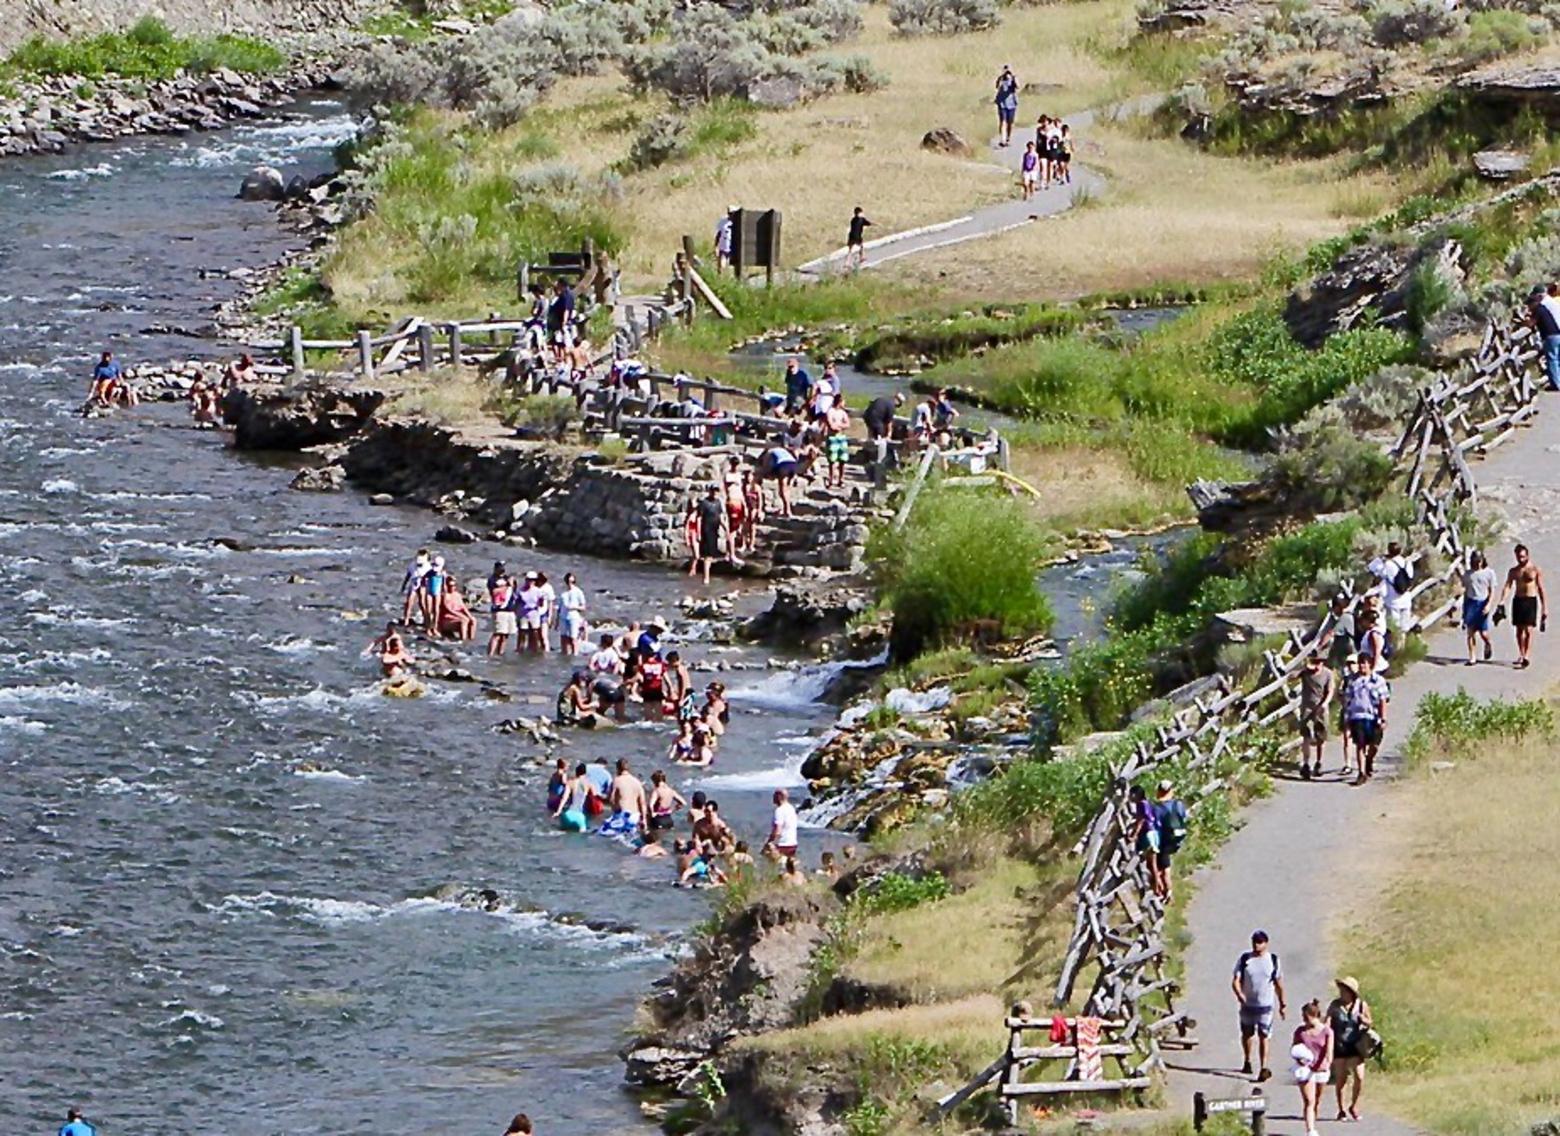 The summer throngs descend upon Boiling River in Yellowstone. The geothermal soaking site swells with visitors in summer. And, it just happens to reside within a wildlife migration corridor used by elk, bison, mule deer and bighorn sheep.  Everybody wants to have fun and soaking at Boiling River is an exotic experience. Having fun is good for our physical and mental health. But the mere act of being an outdoor recreationist does not make one a conservationist.  Photo courtesy Jim Peaco/NPS